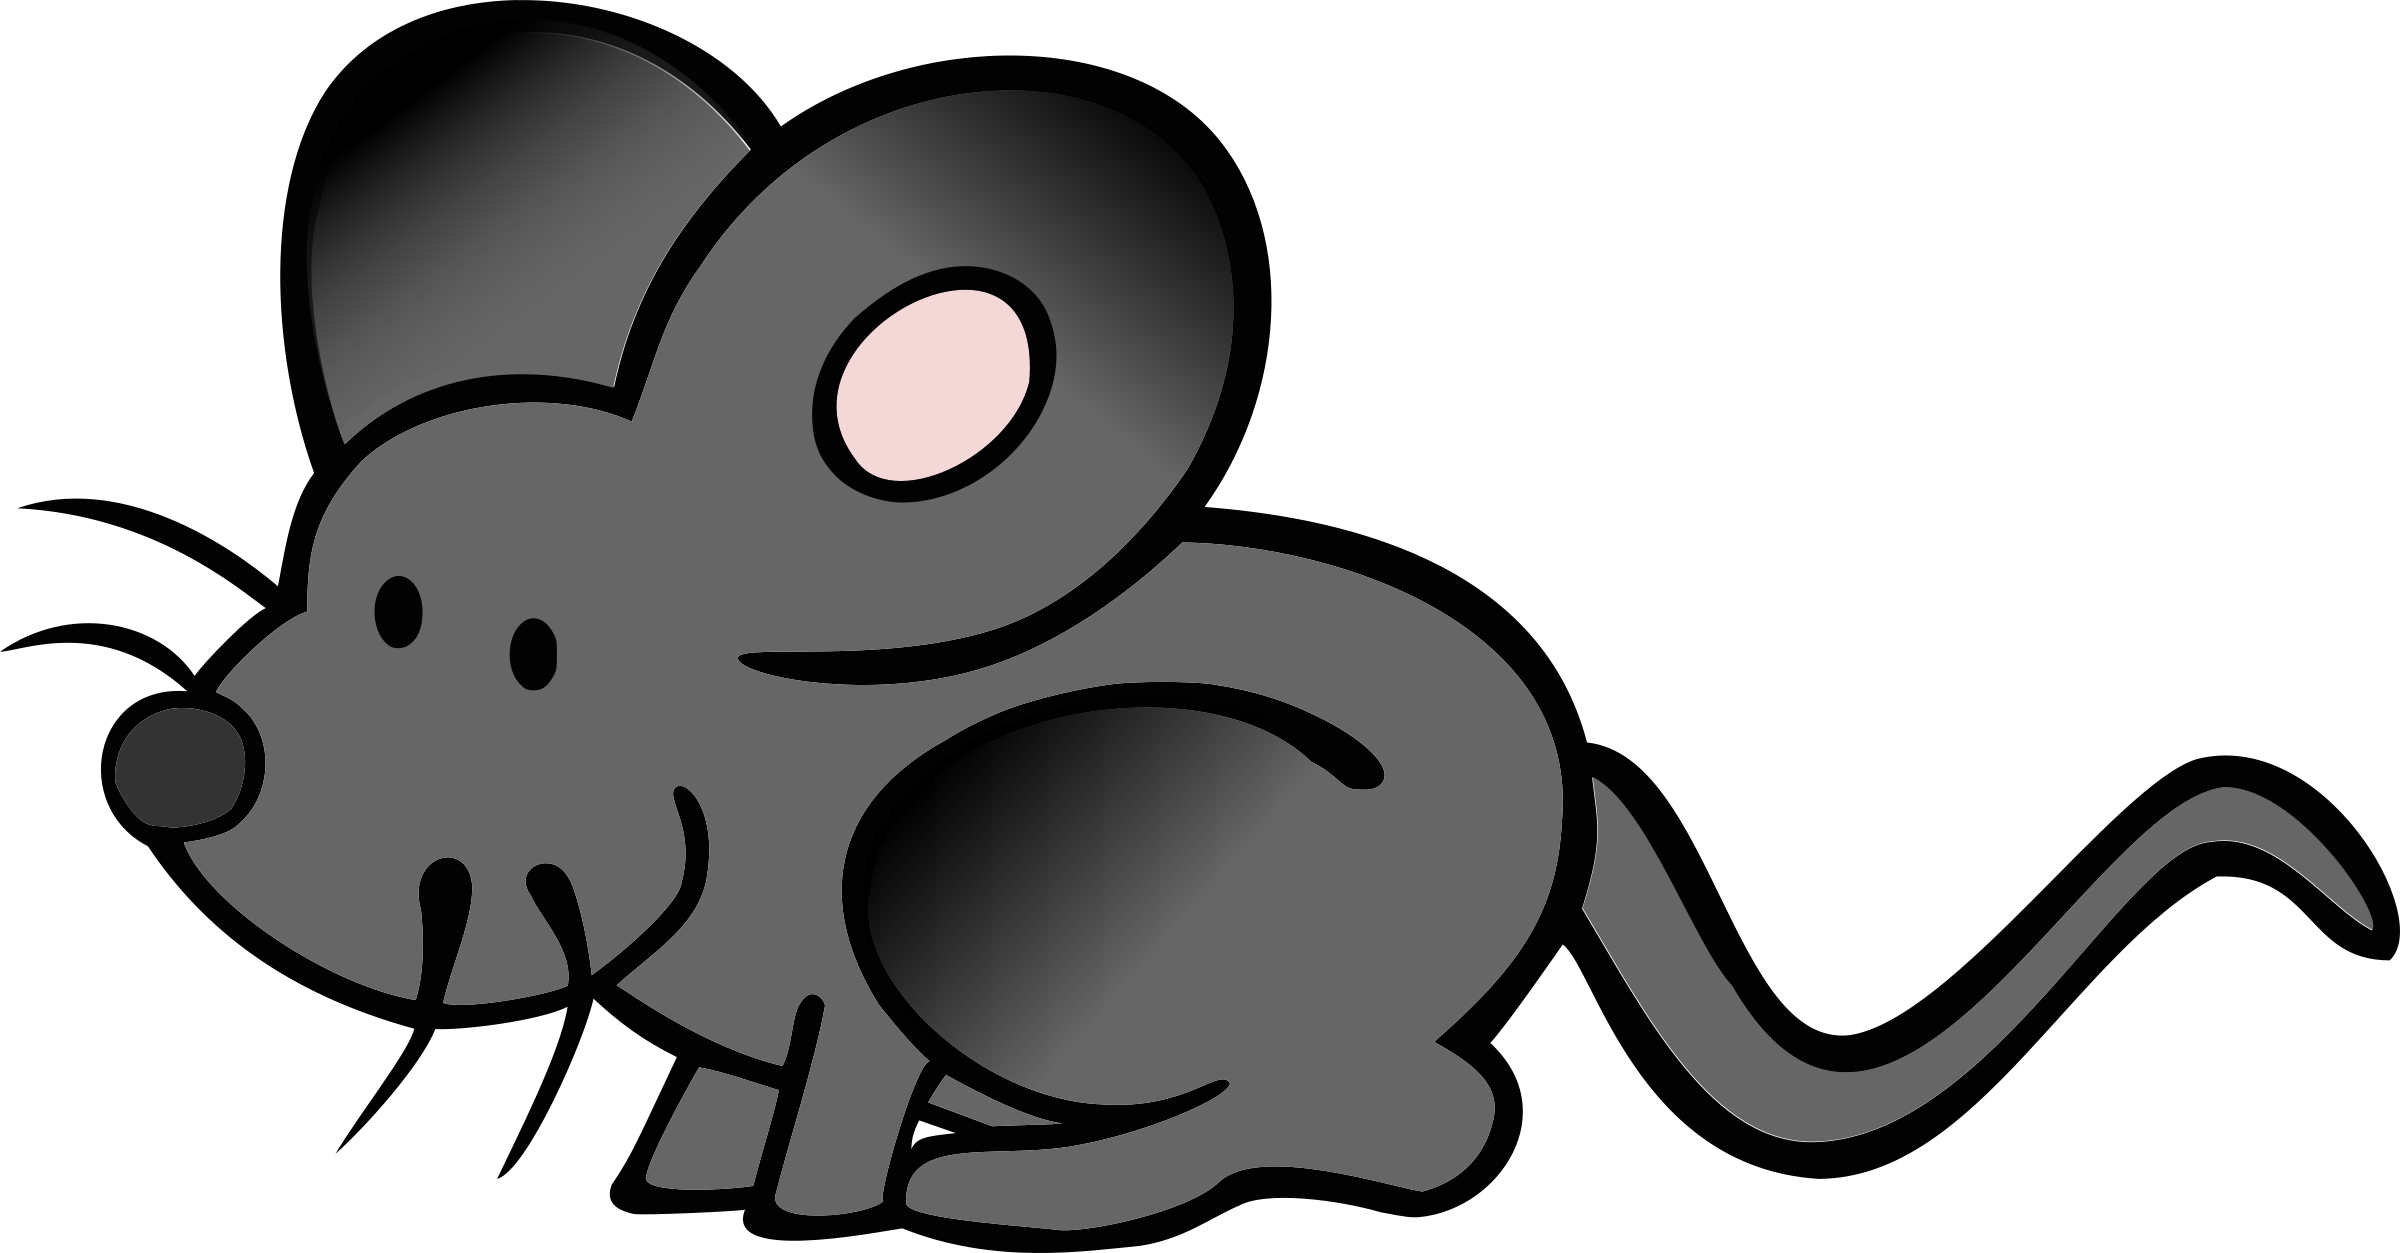 Mad clipart rat. Cartoon mouse image group